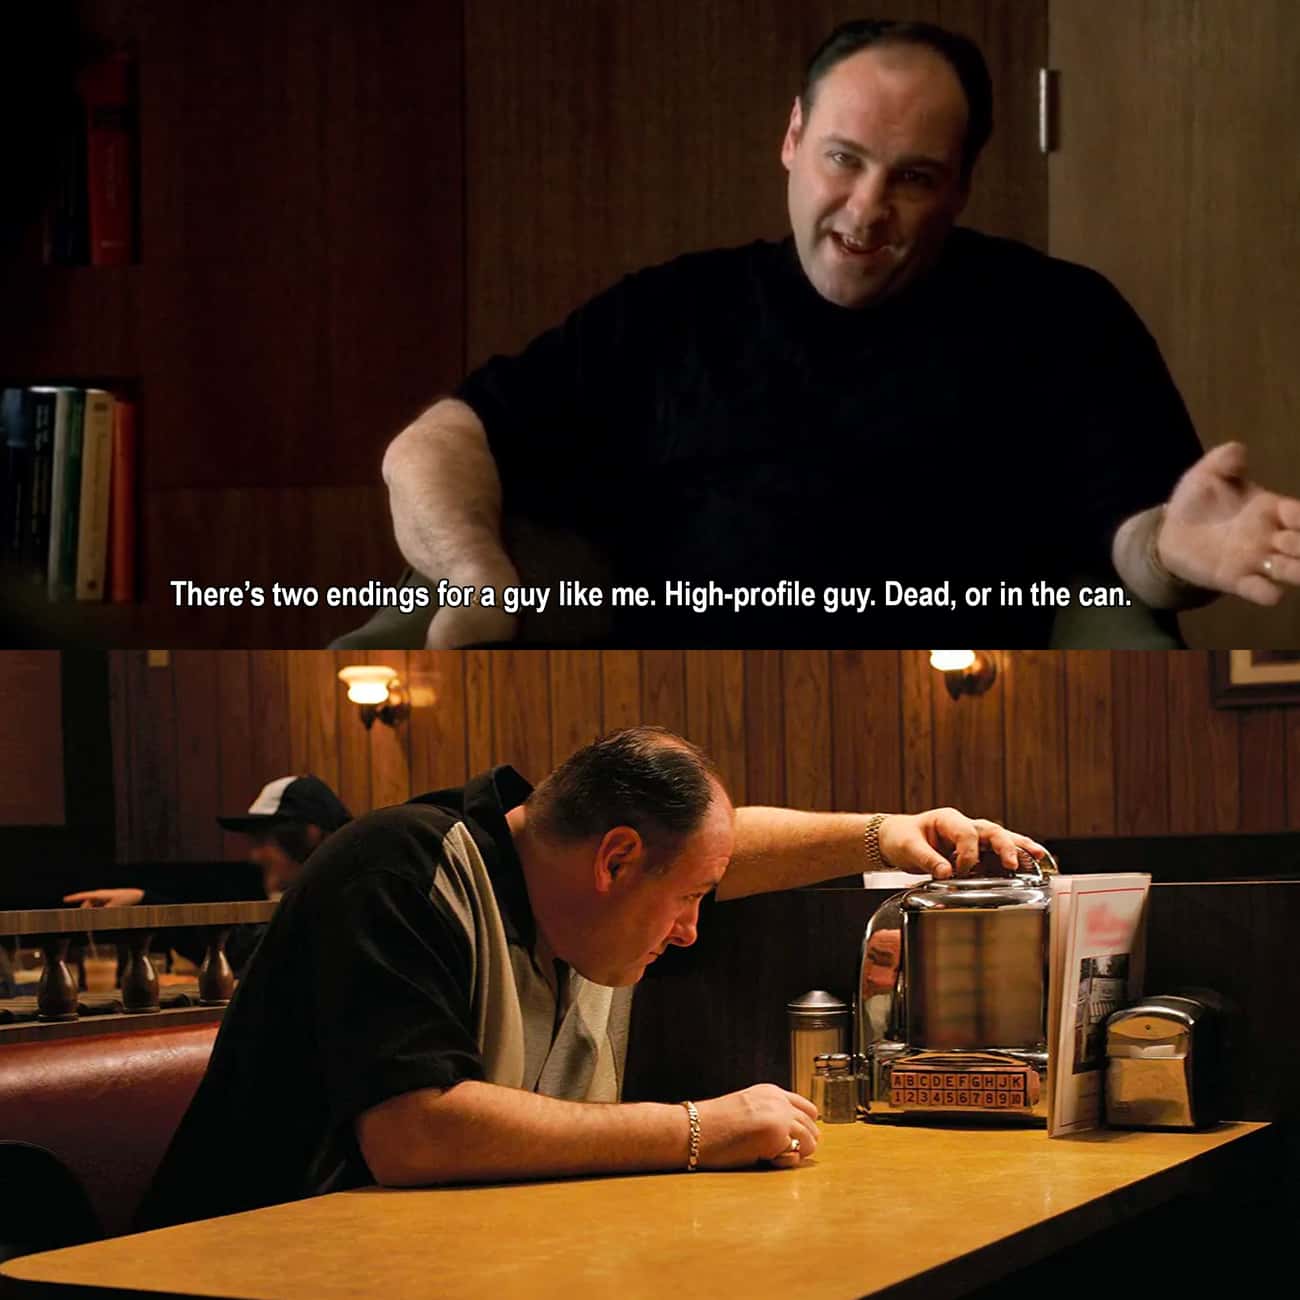 In 'The Sopranos,' Tony Soprano Says, 'There's Two Endings For A Guy Like Me: Dead Or In The Can' - The Finale Ends With Him Either Being Shot Or Indicted 